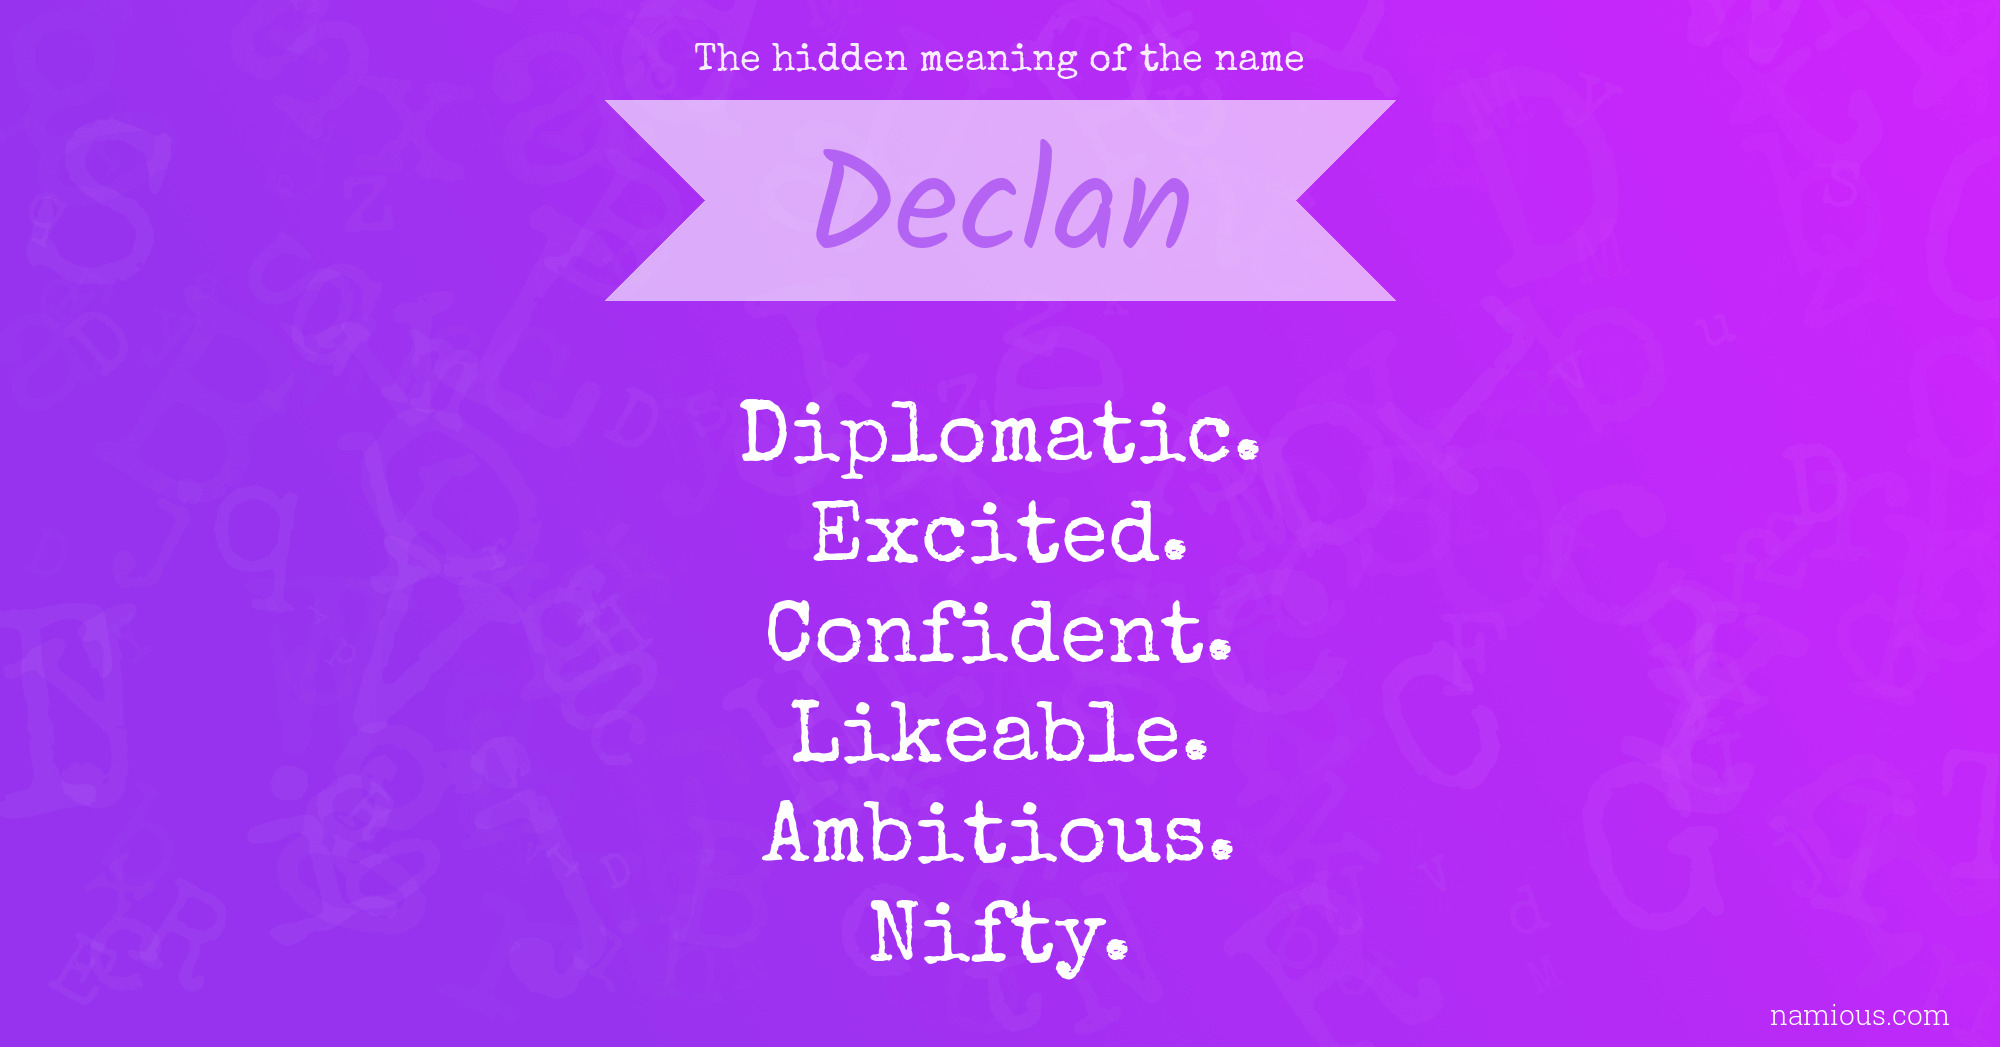 The hidden meaning of the name Declan